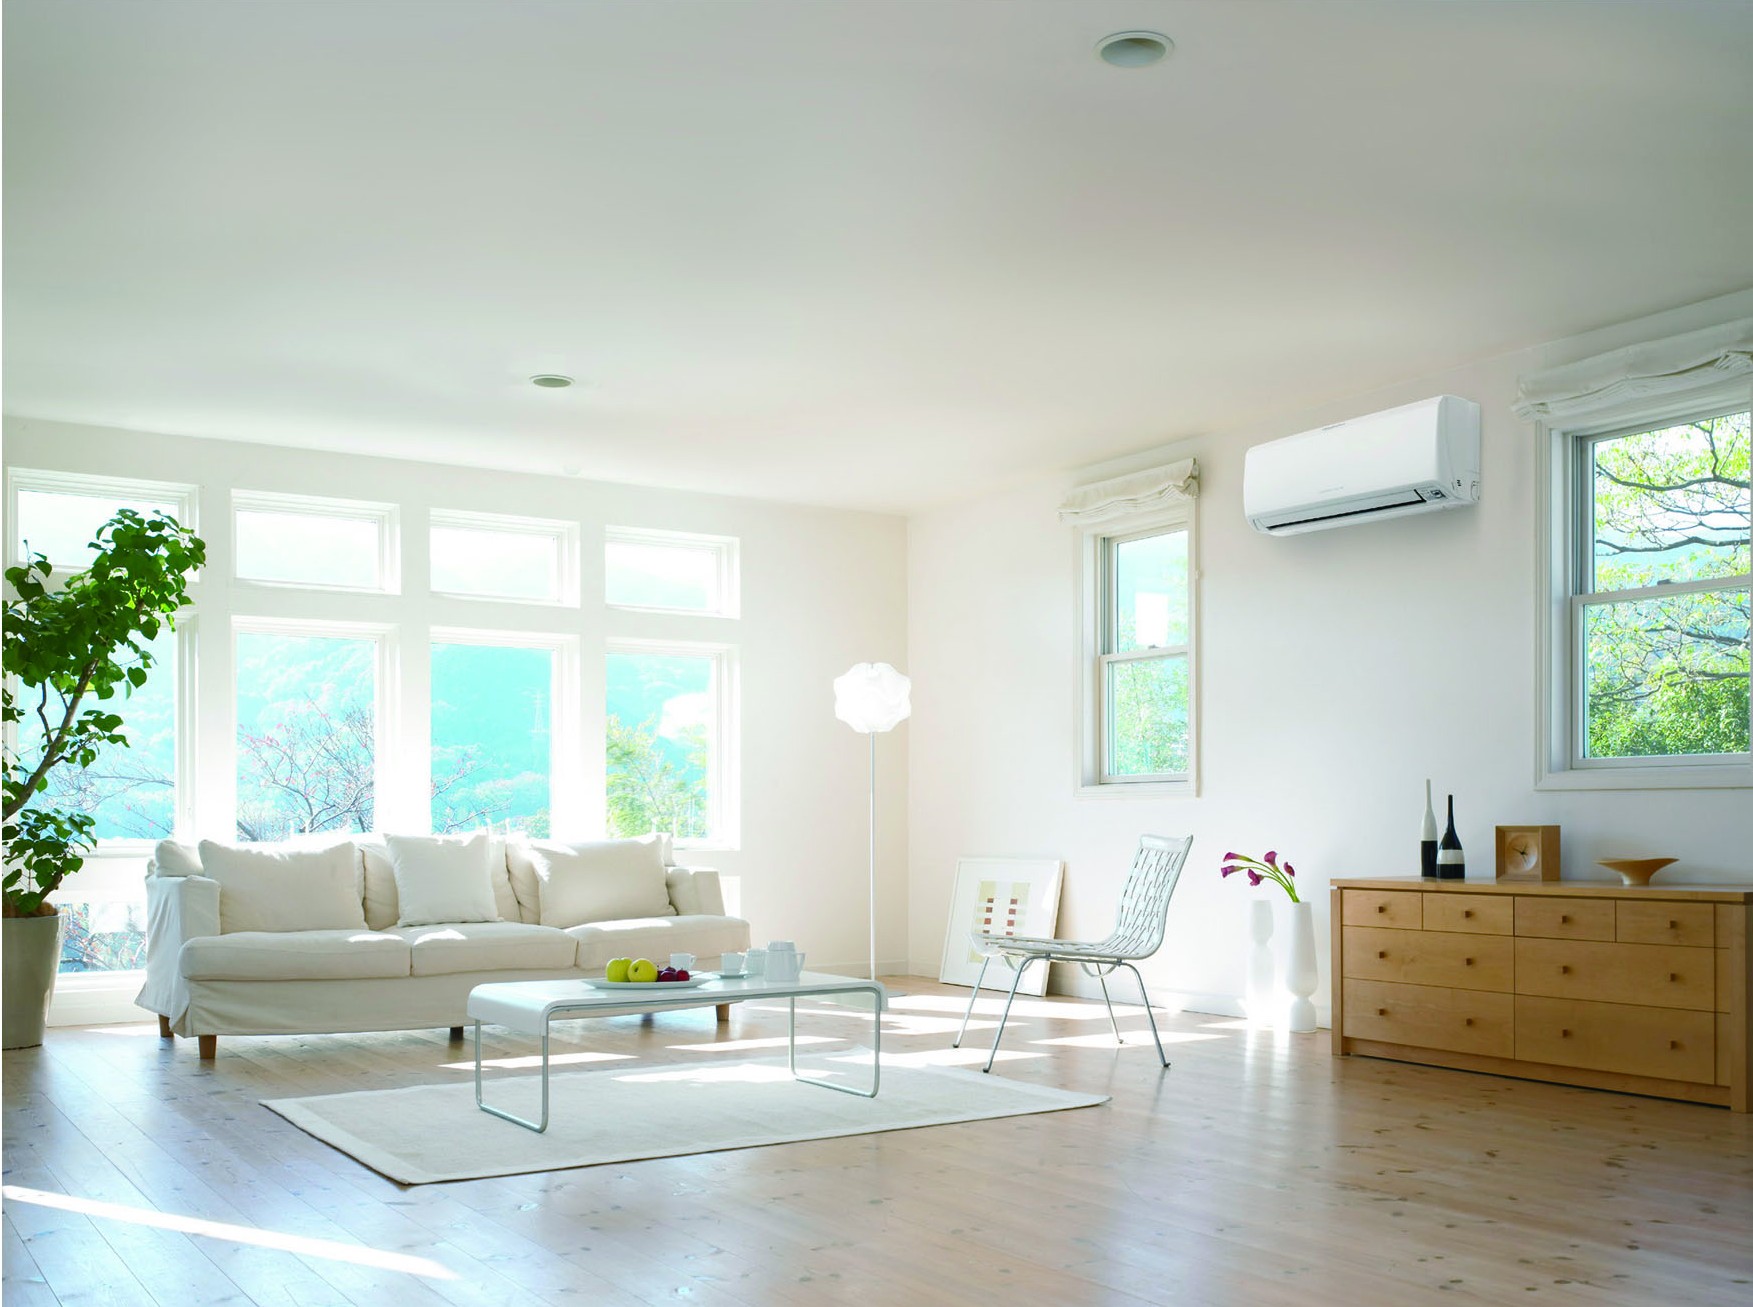 Mitsubishi Split System Brochure - Air Conditioning In Home , HD Wallpaper & Backgrounds